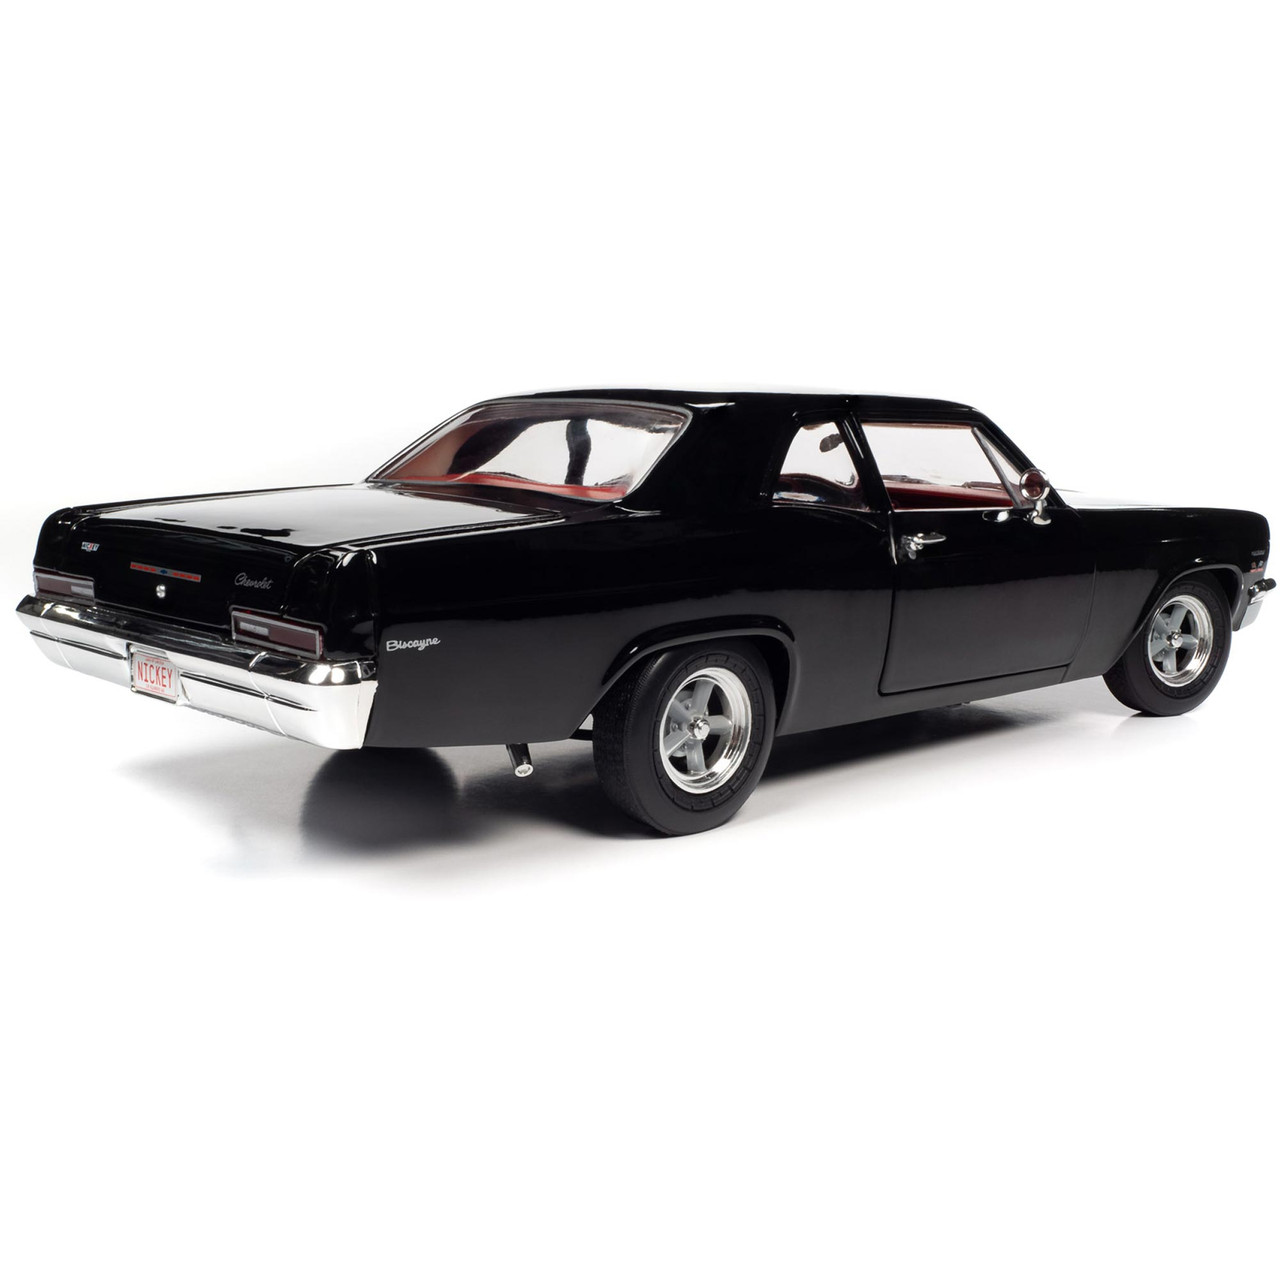 1966 Chevrolet Biscayne 2-Door Coupe NICKEY 1:18 Scale Diecast Replica  Model by American Muscle - Ertl